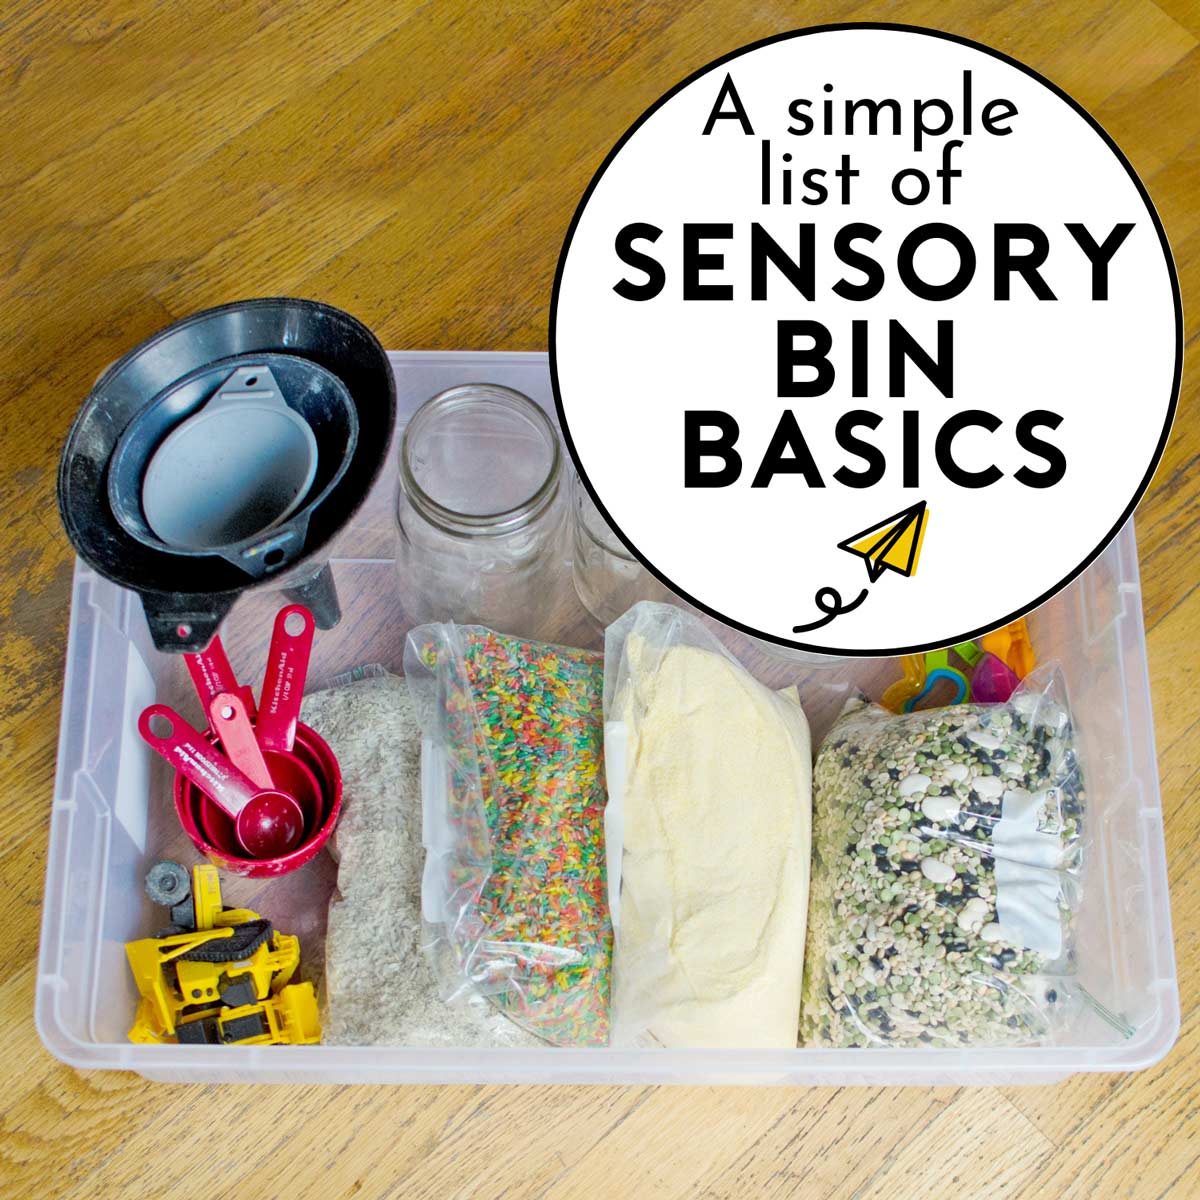 A simple list of sensory bin basics: image shows supplies in a storage container to create sensory activities